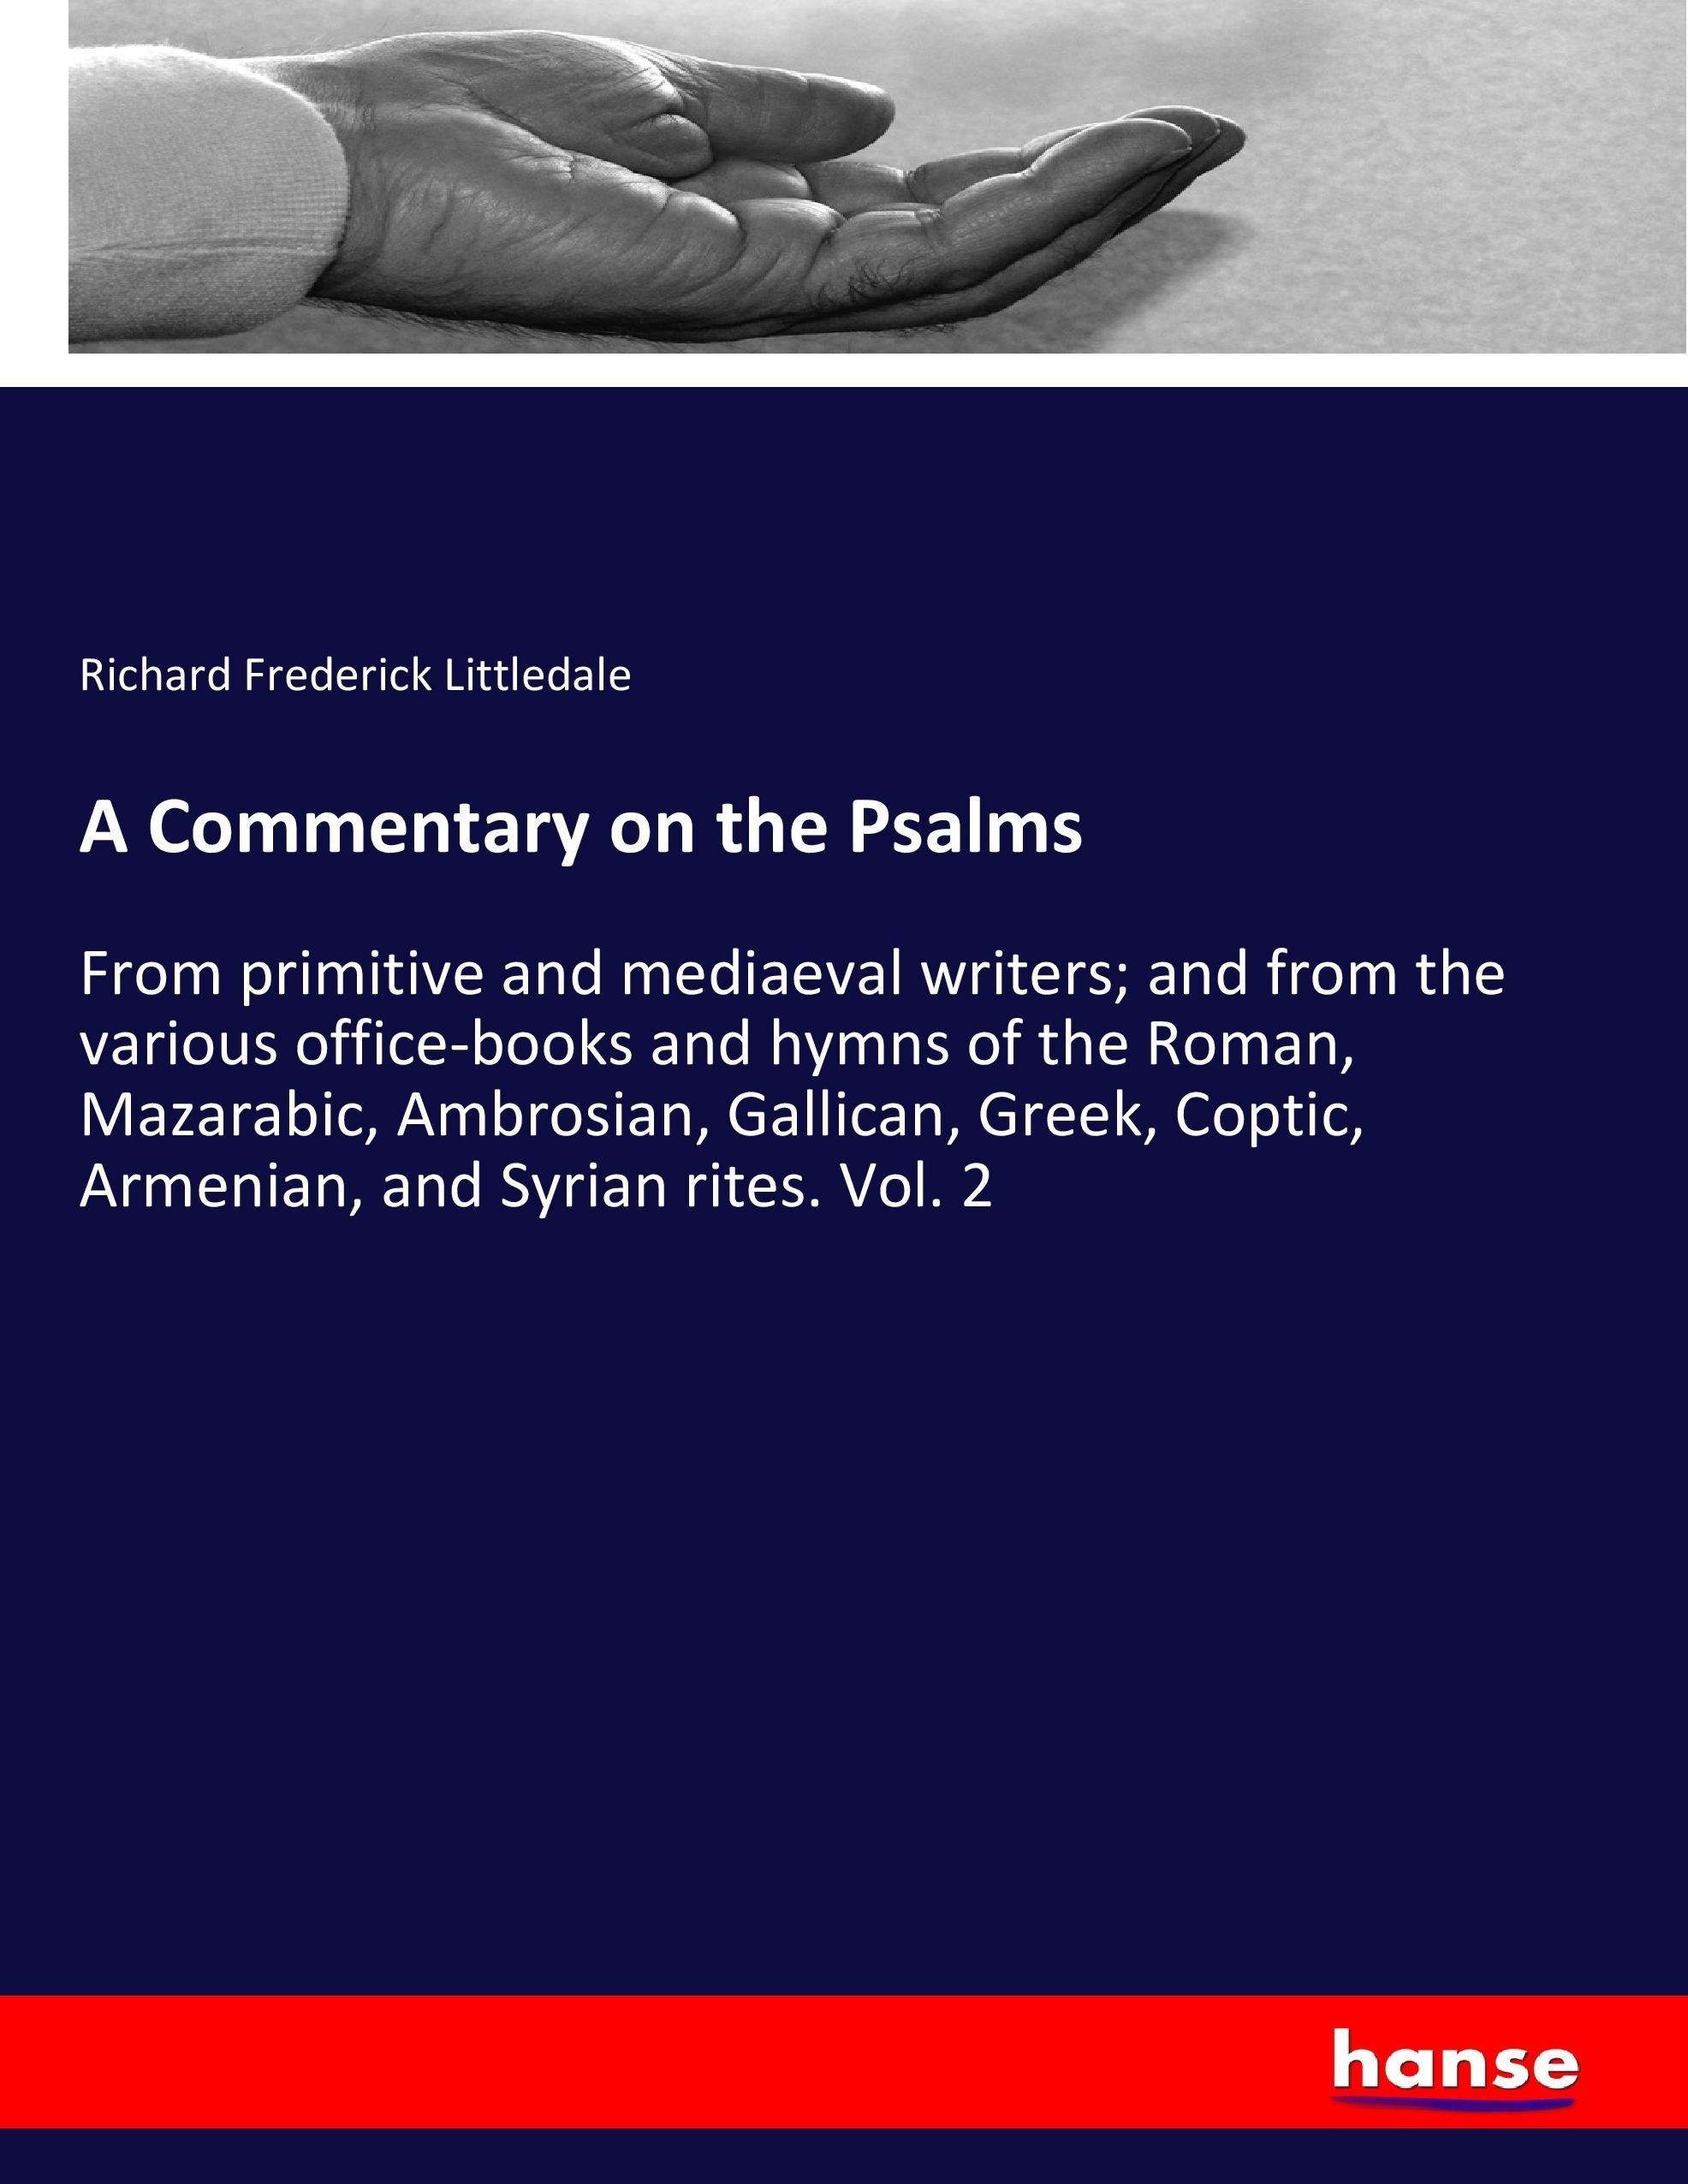 A Commentary on the Psalms / Richard Frederick Littledale / Taschenbuch / Paperback / 564 S. / Englisch / 2017 / hansebooks / EAN 9783744752121 - Littledale, Richard Frederick